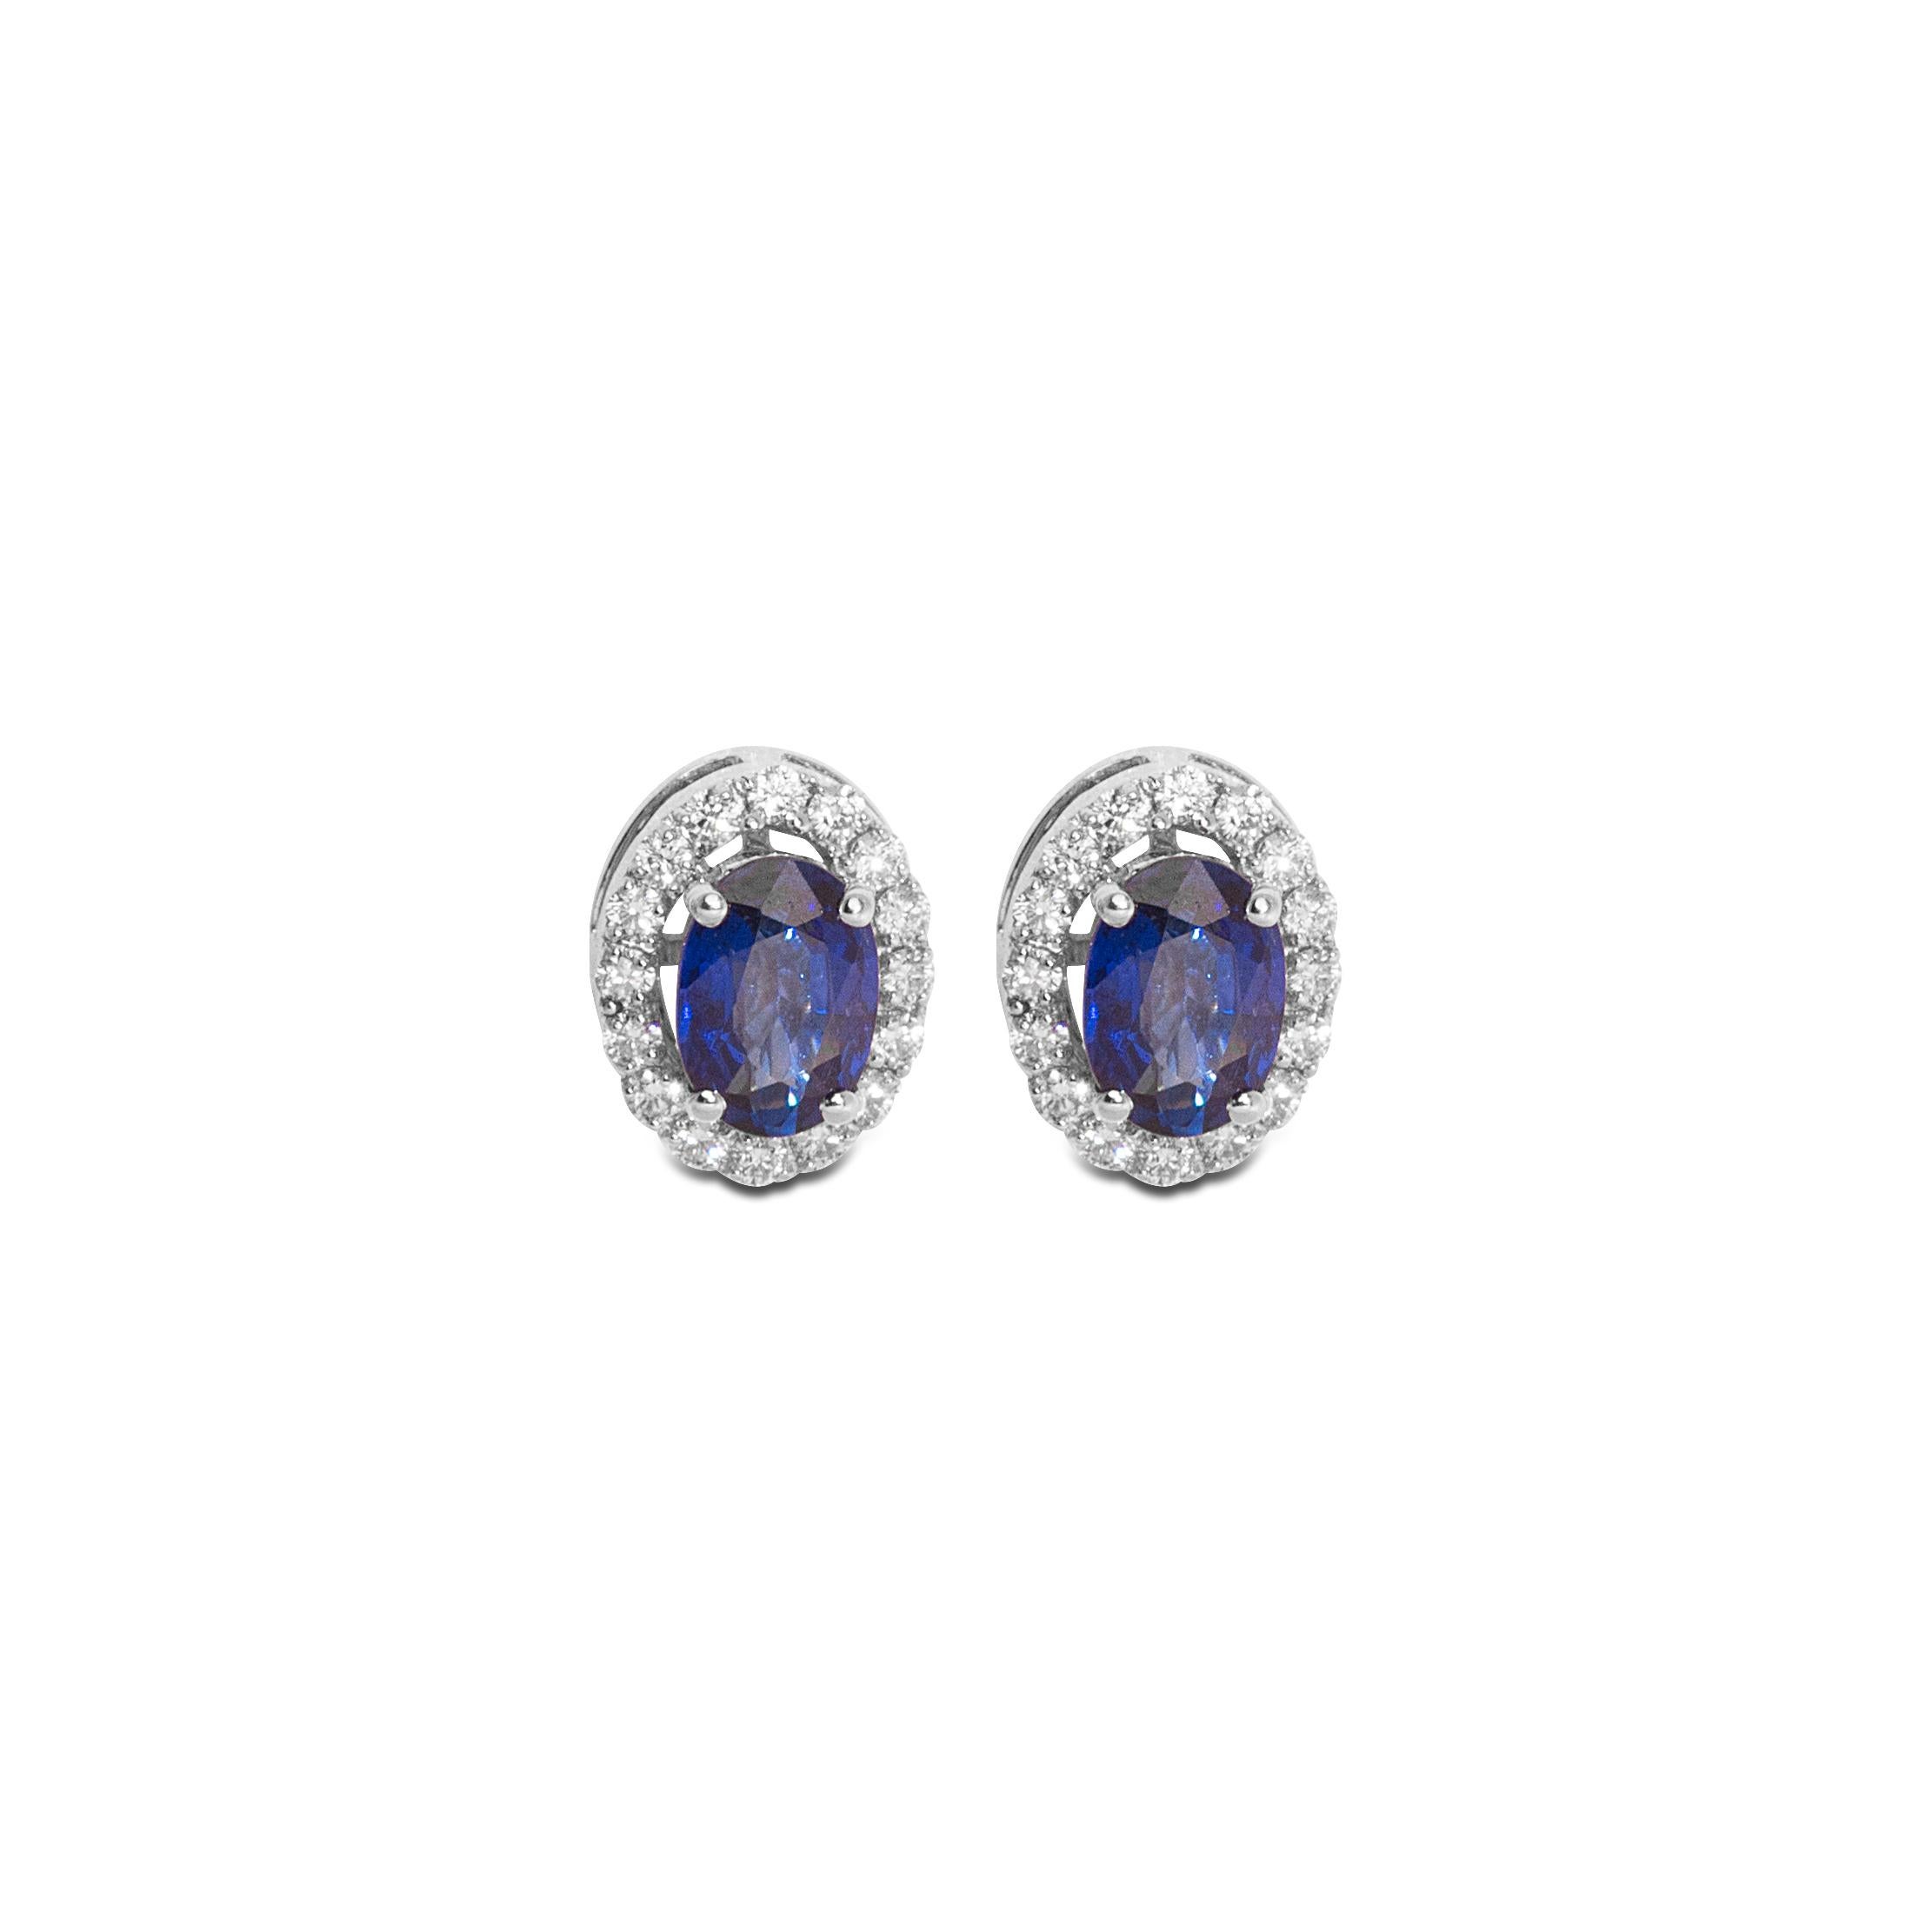 18 Karat White Gold Blue Sapphire Diamond Stud Earrings

These simple stud earrings set in 18 Karat white gold, studded with beautiful blue sapphires and diamonds (GH color / VVS-VS Purity) are ideal for both day and evening wear.

We will provide